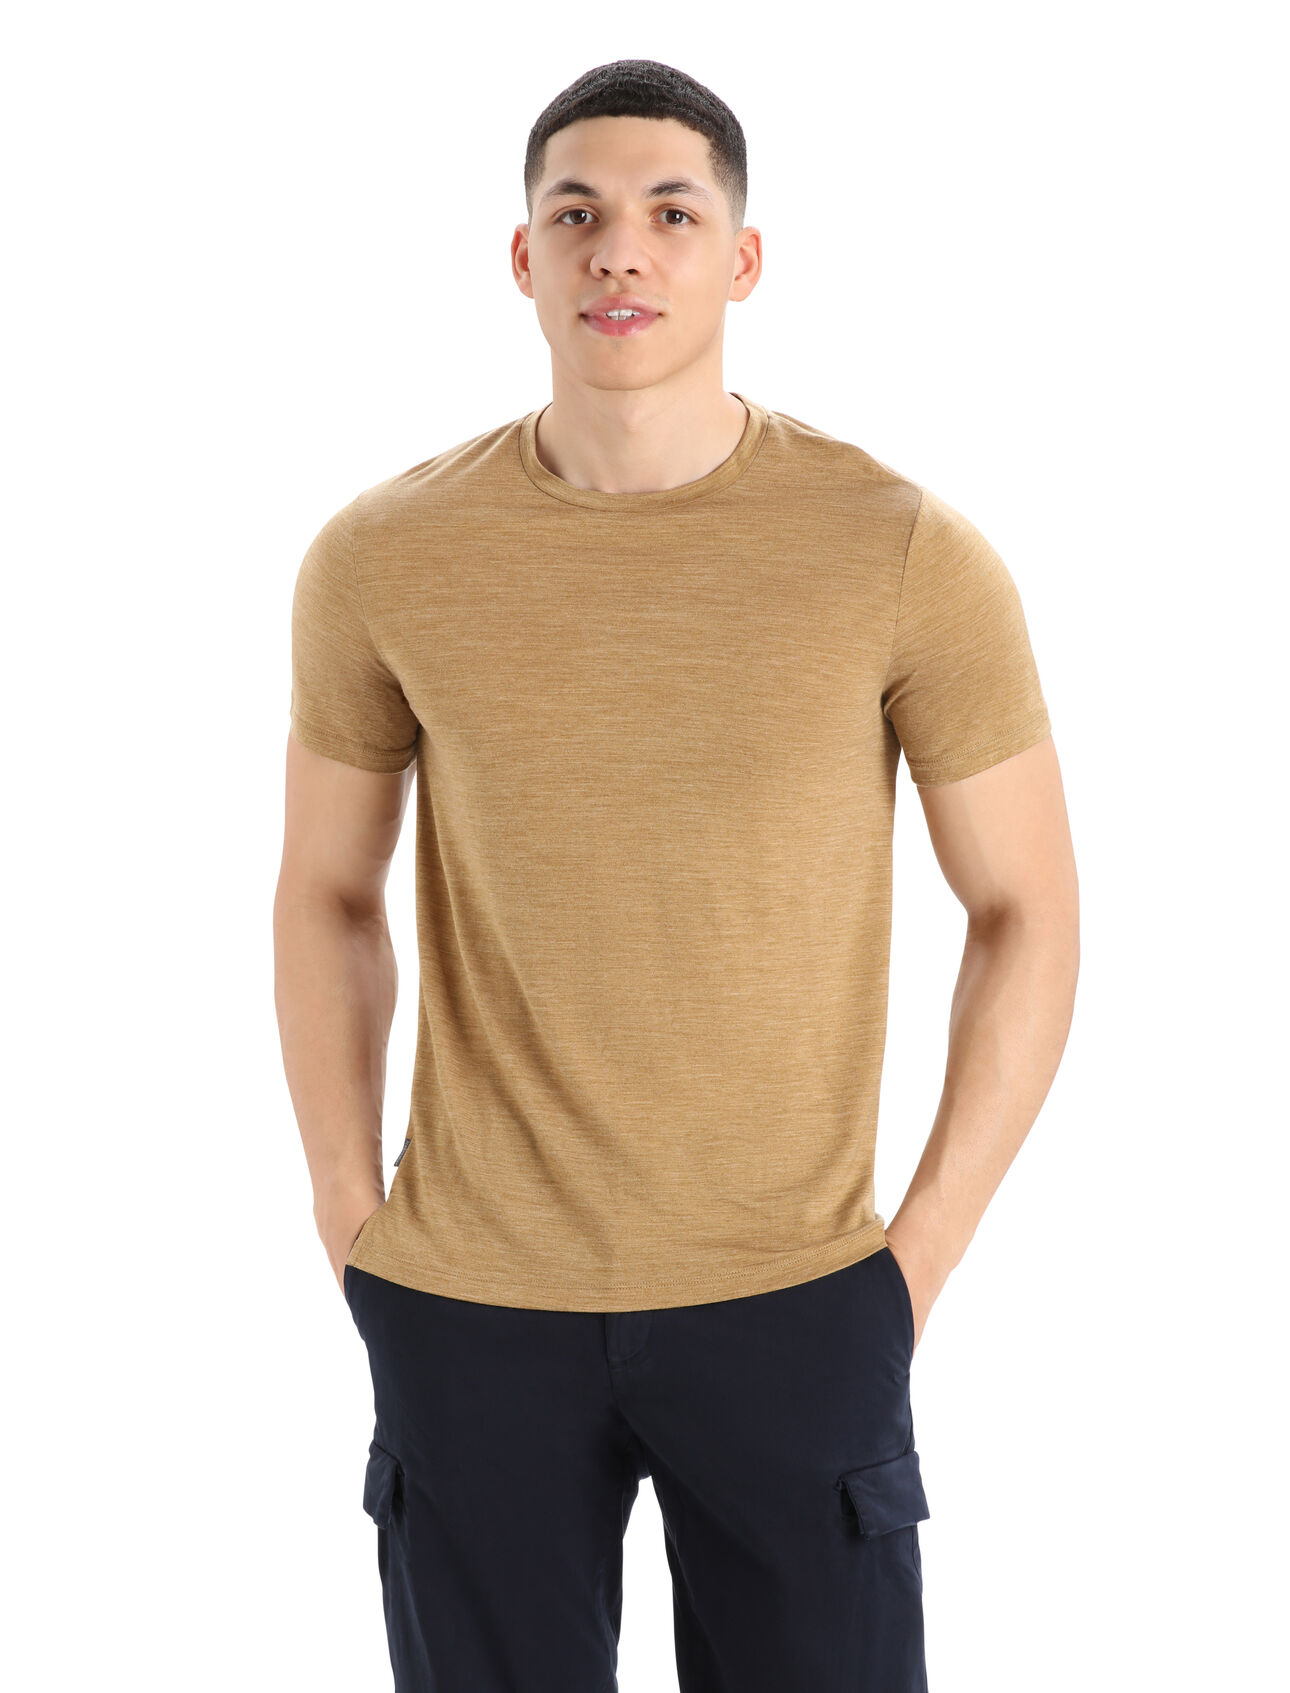 Mens Merino Sphere II Short Sleeve T-Shirt A soft merino-blend tee made with our lightweight Cool-Lite™ jersey fabric, the Sphere II Short Sleeve Tee provides natural breathability, odor resistance and comfort.